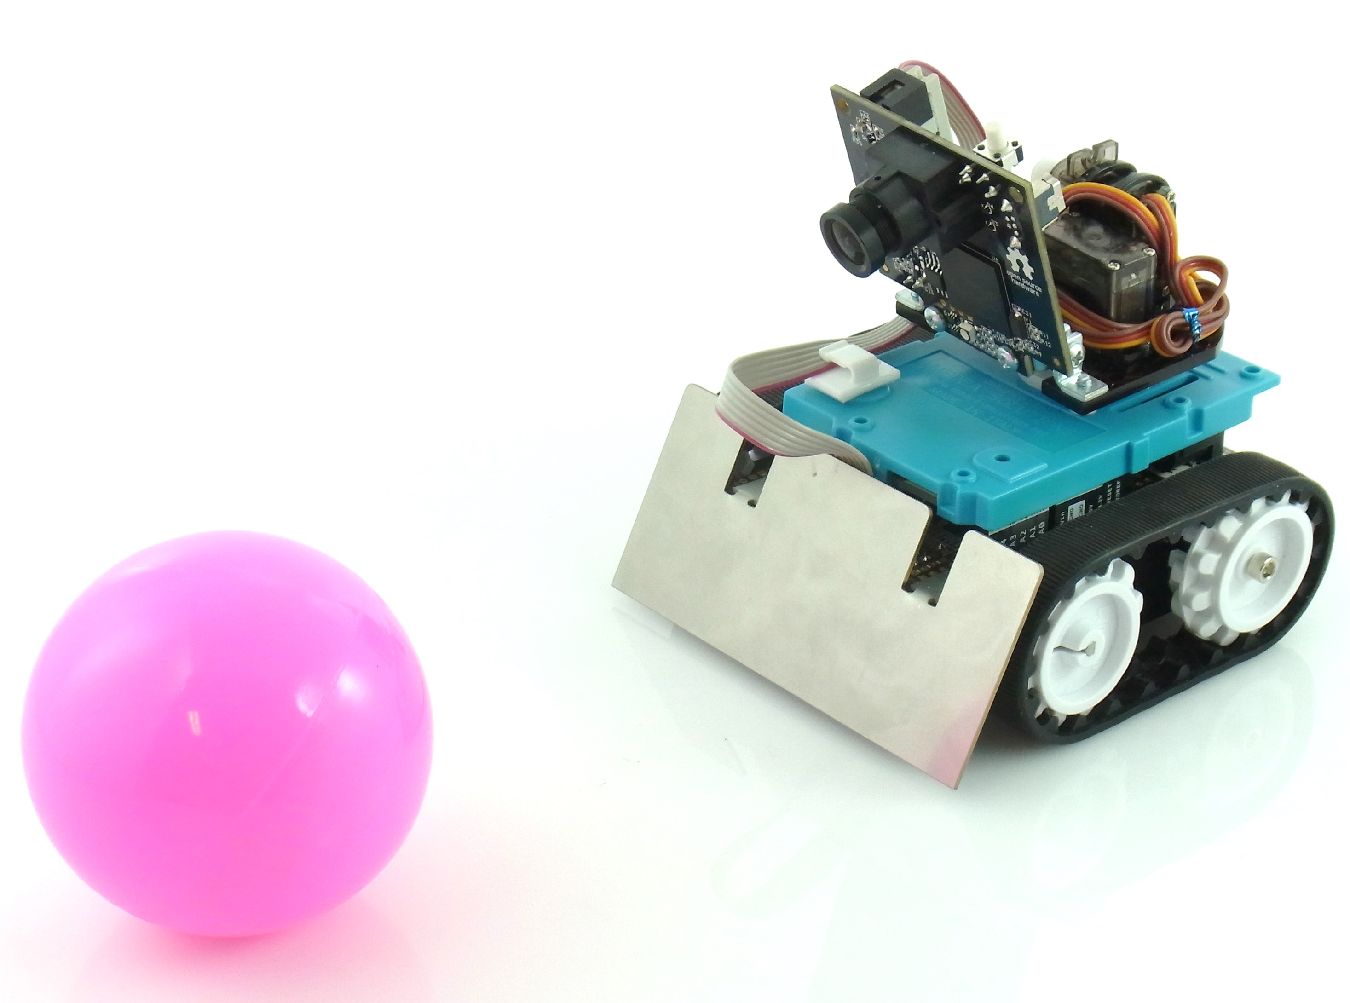 Photo1: Pixy + Zumo Image Recognition following Robot (Assembled) (1)